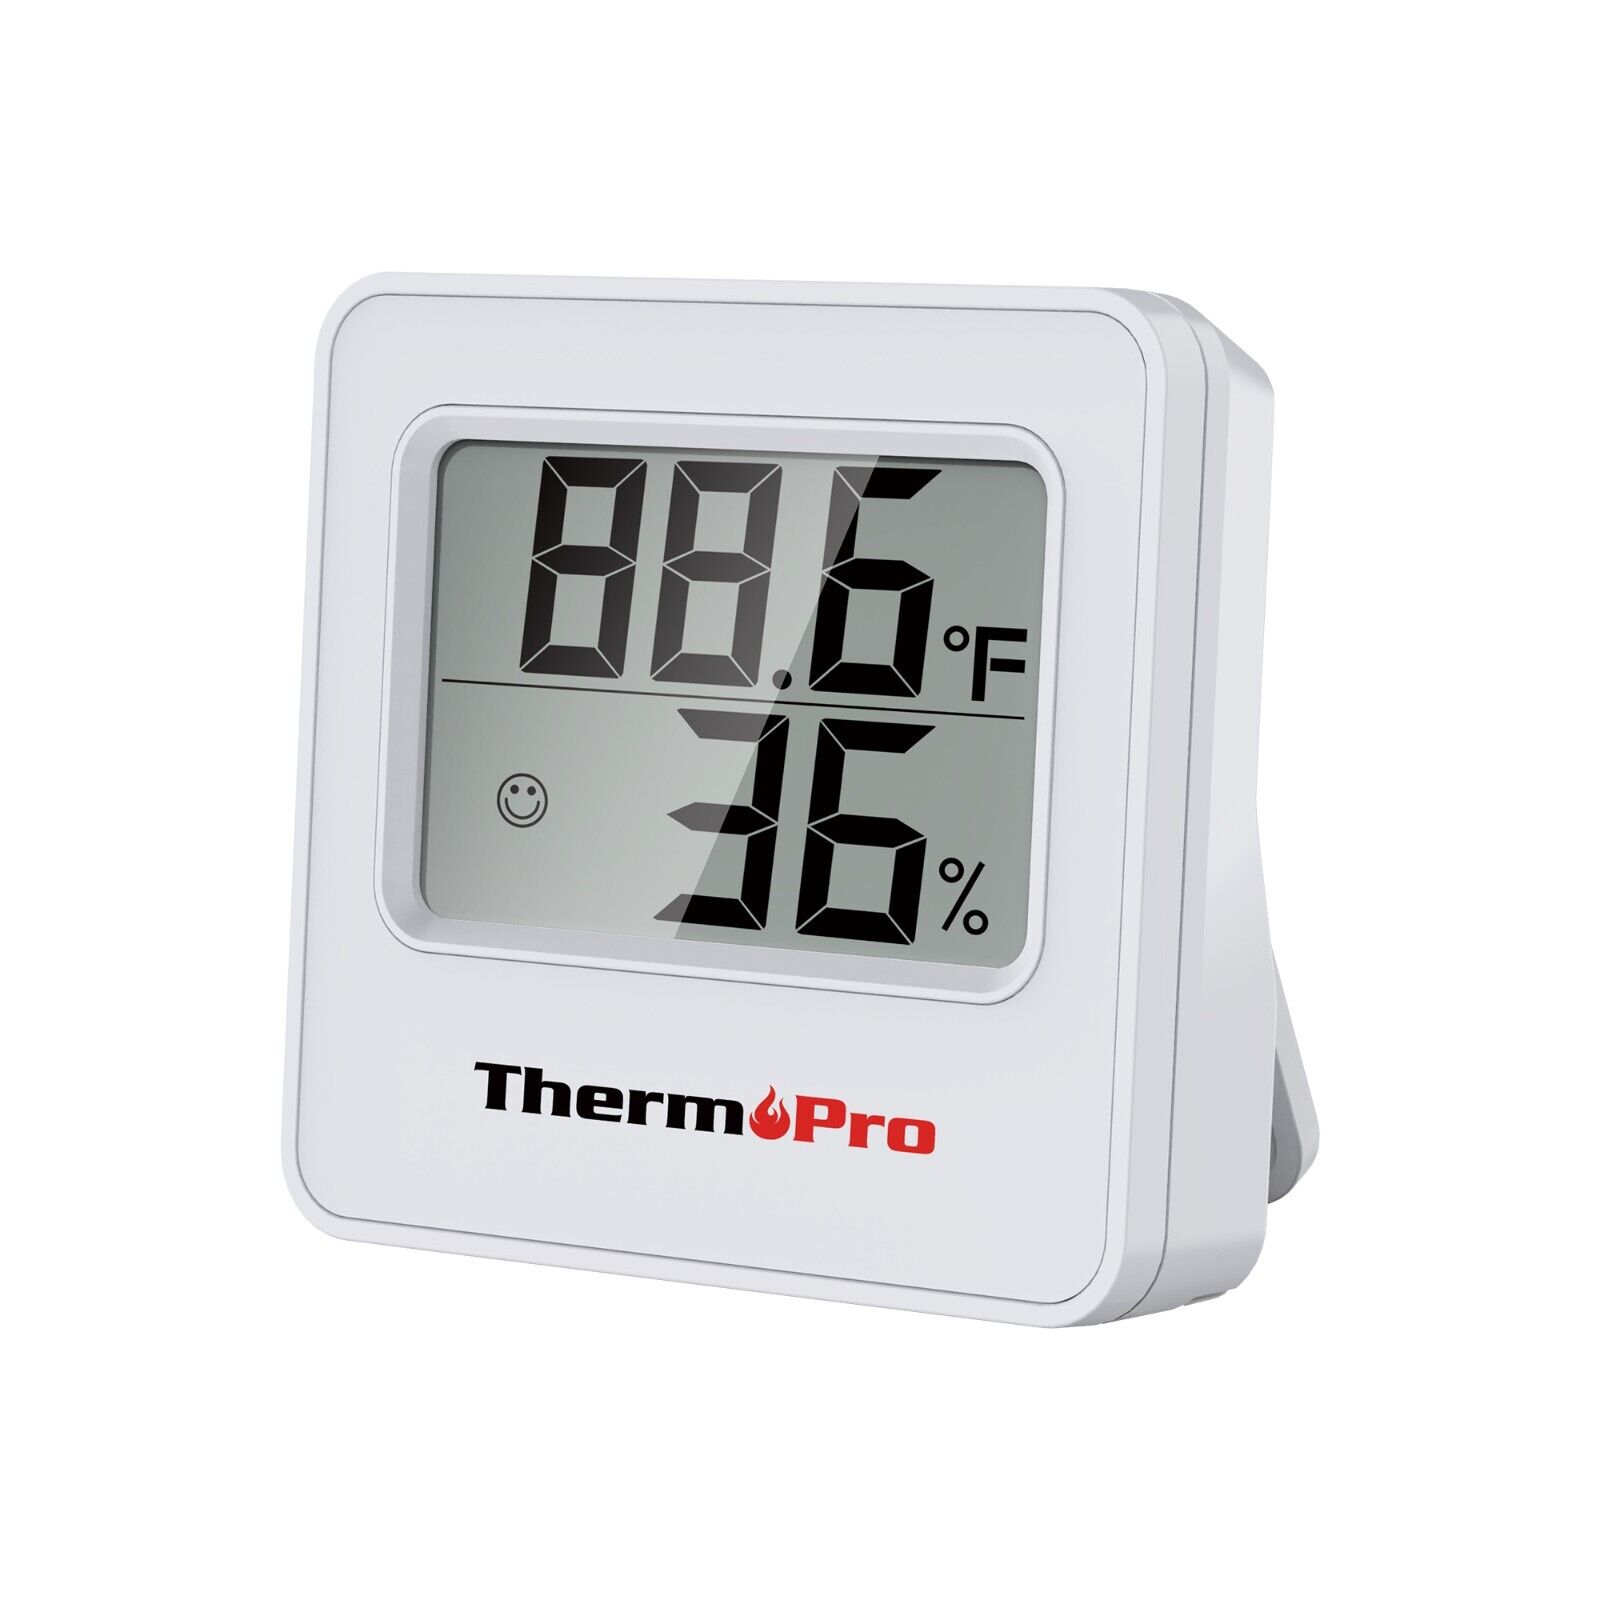 ThermoPro TP157W Digital Indoor Hygrometer Thermometer Humidity Meter for Room